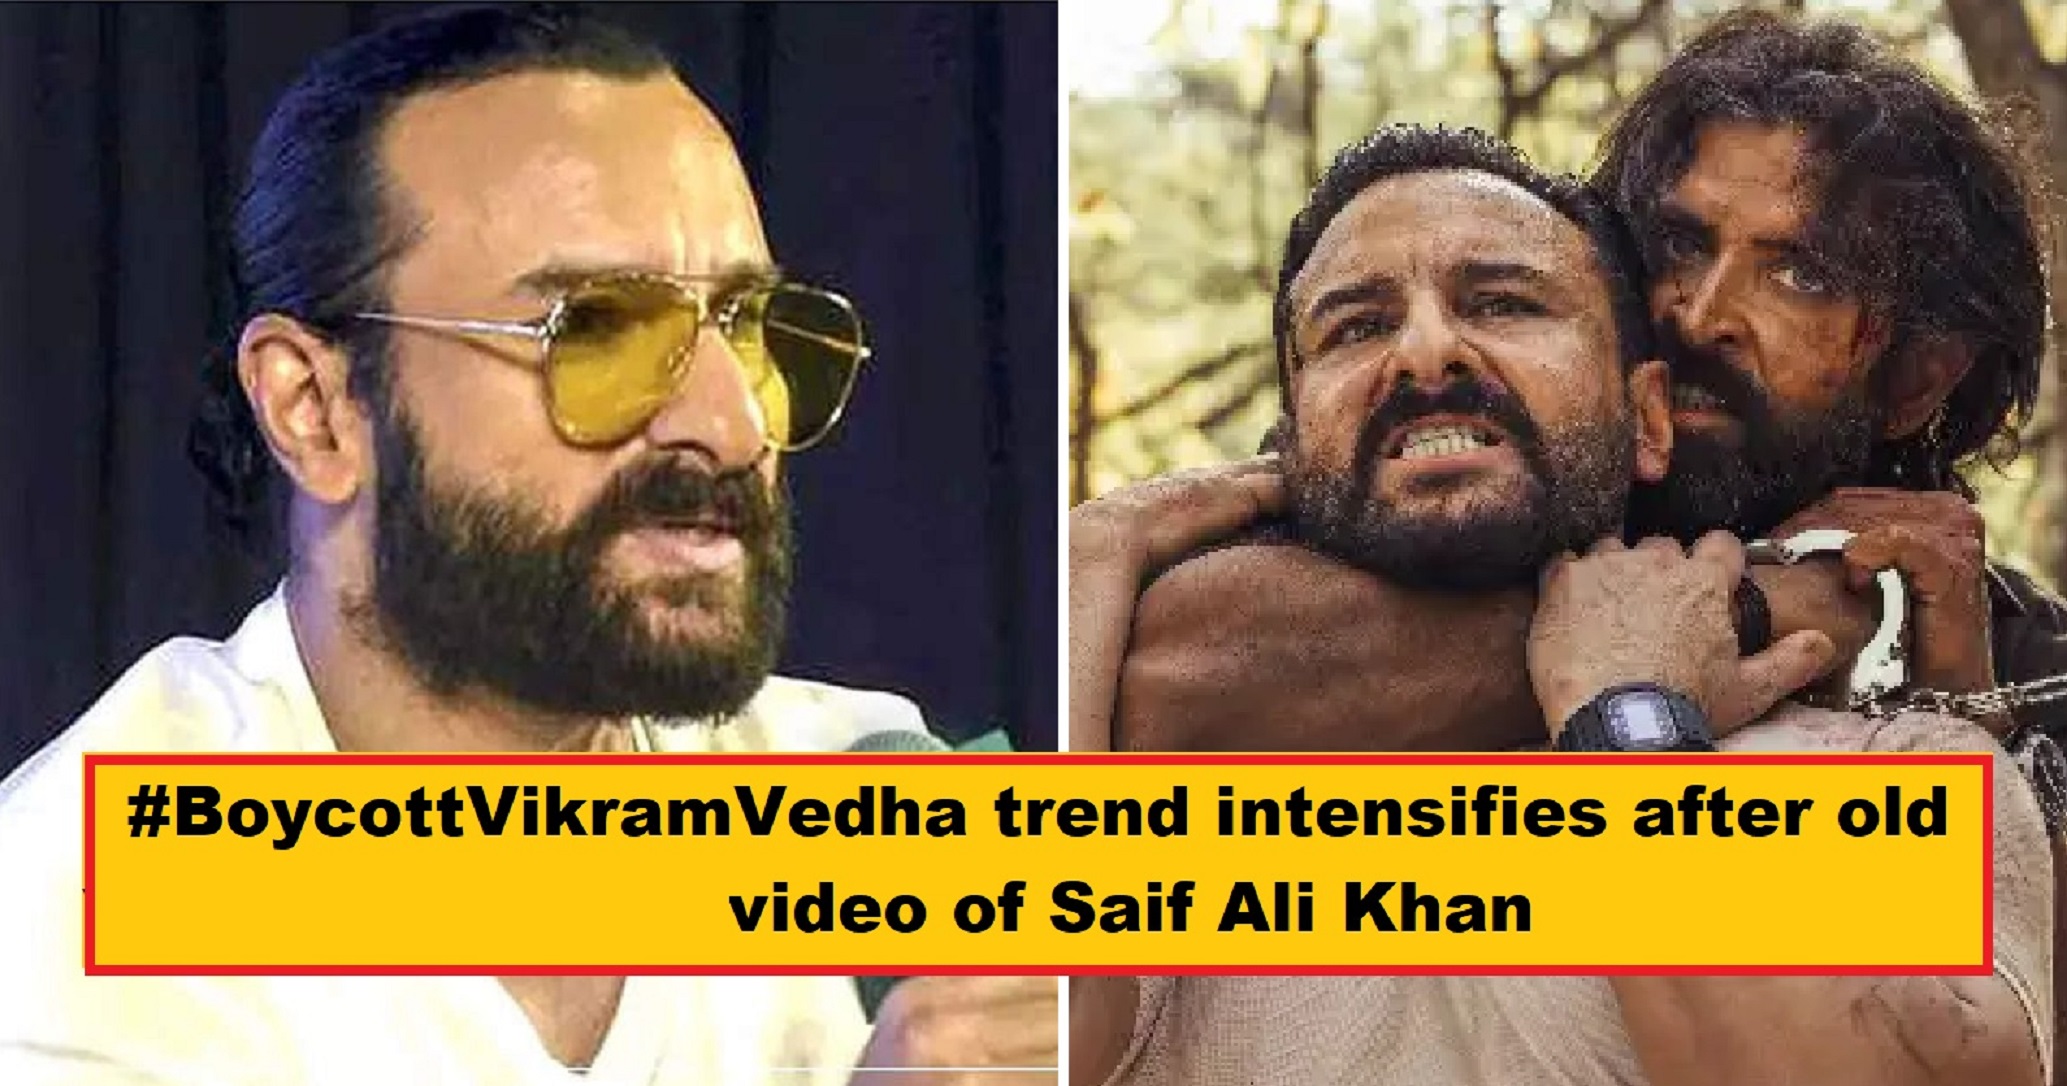 “I Can’t Name My Son Ram”: Old Interview Of Saif Ali Khan Resurfaces, Ahead Of Vikram Vedha Release